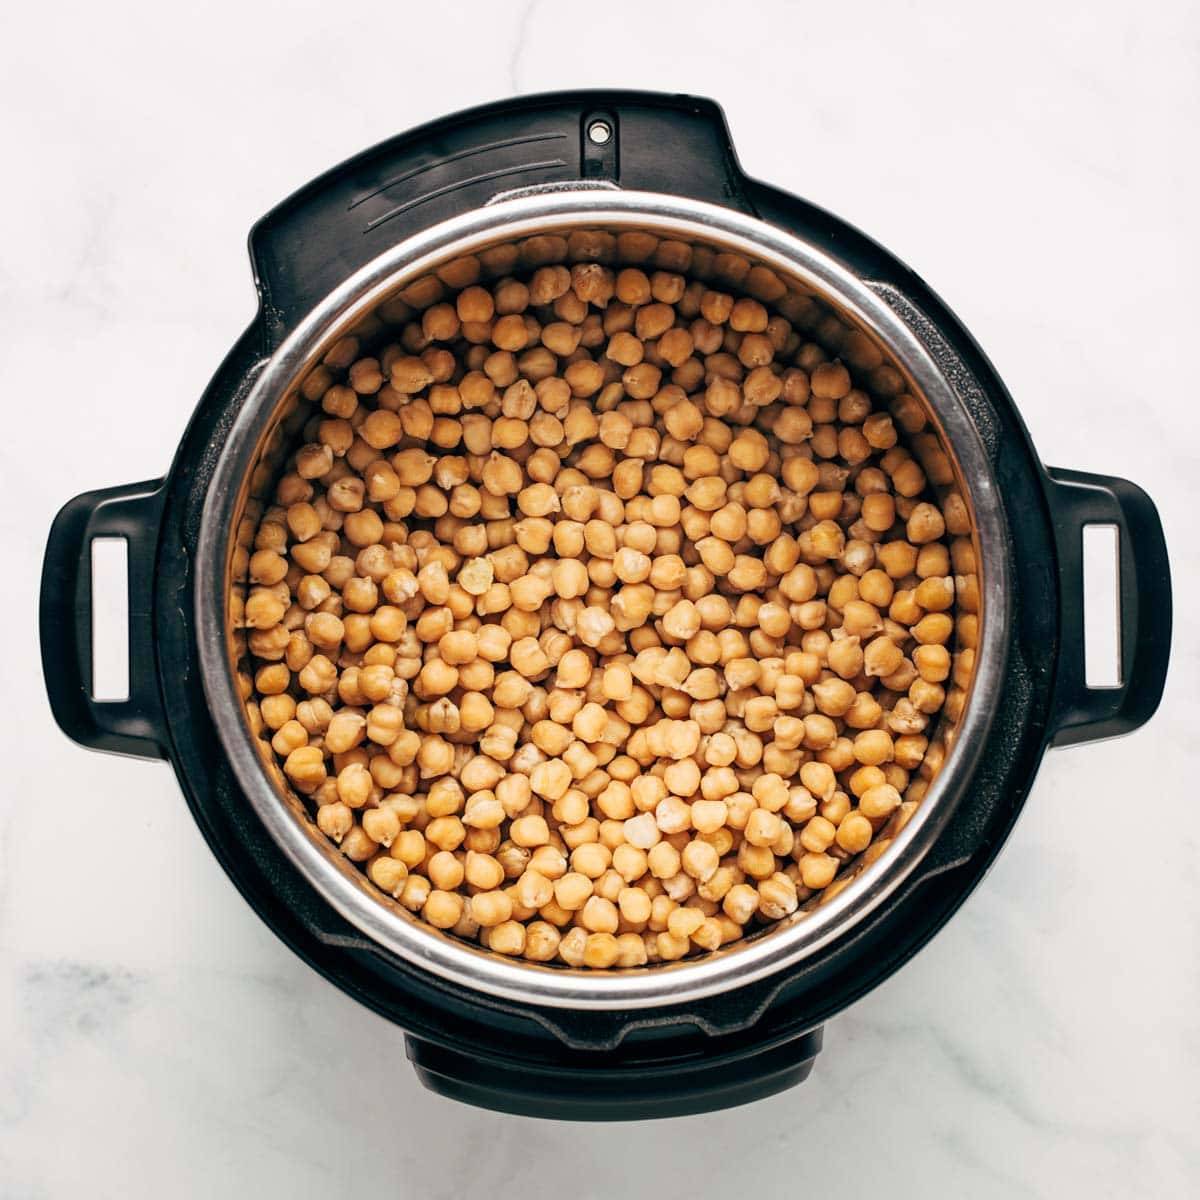 Cooked chickpeas in the Instant Pot.